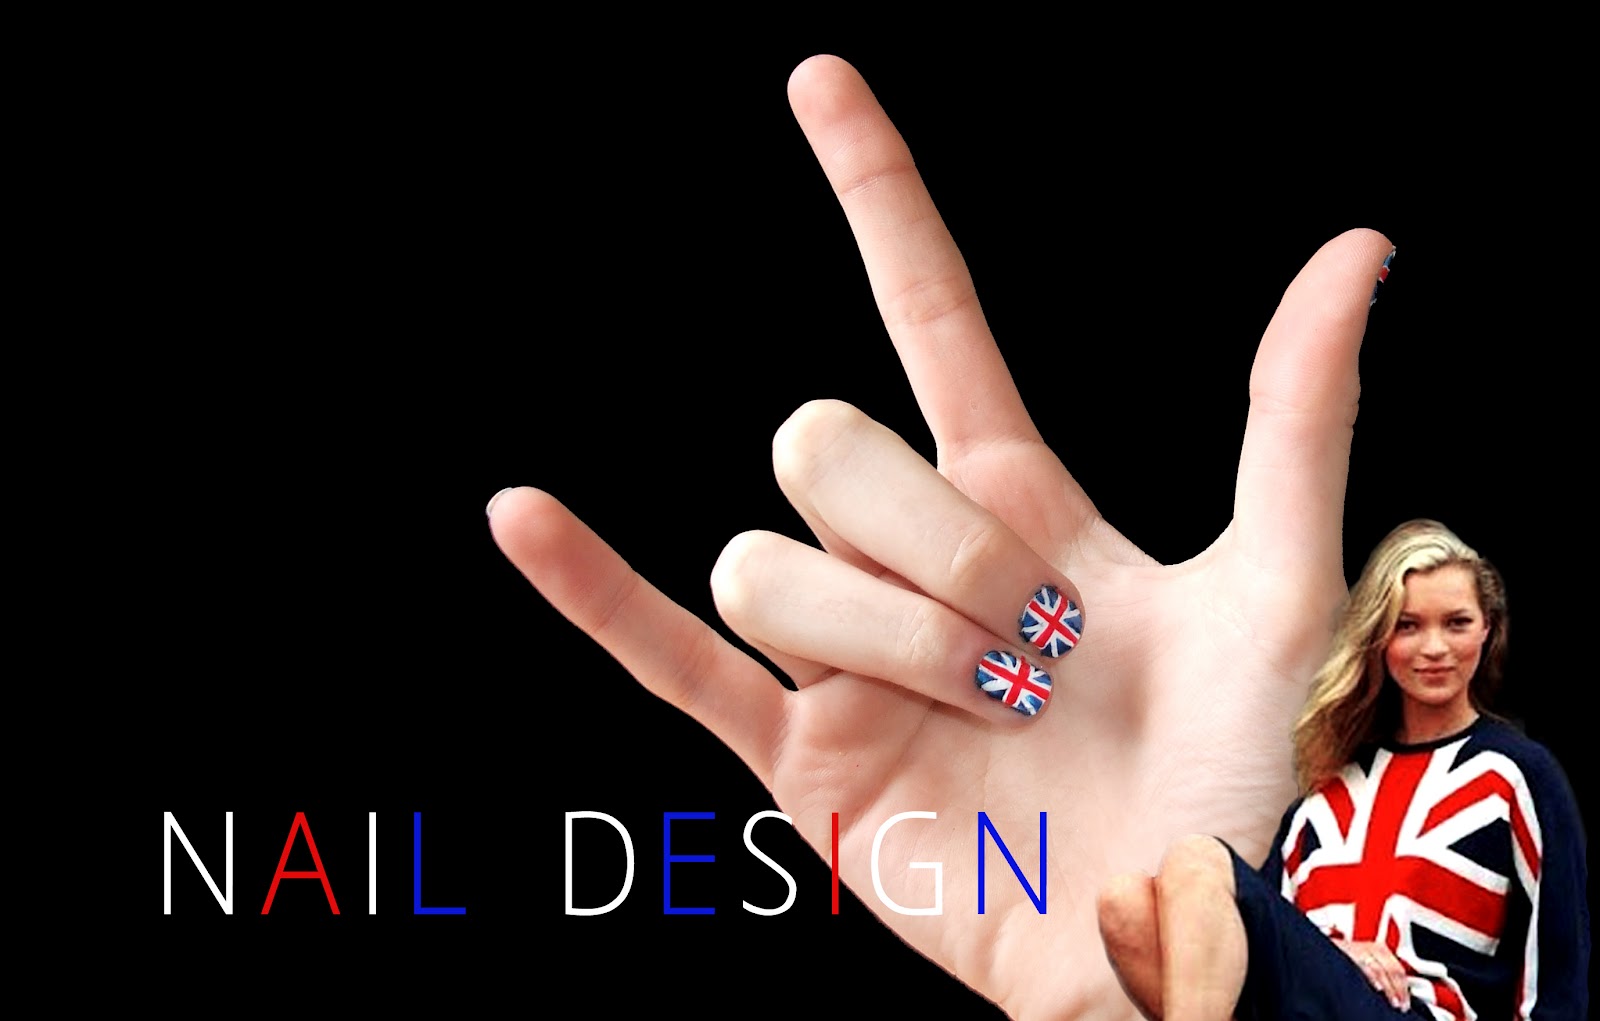 In honor of London Fashion week, I have made an original nail design